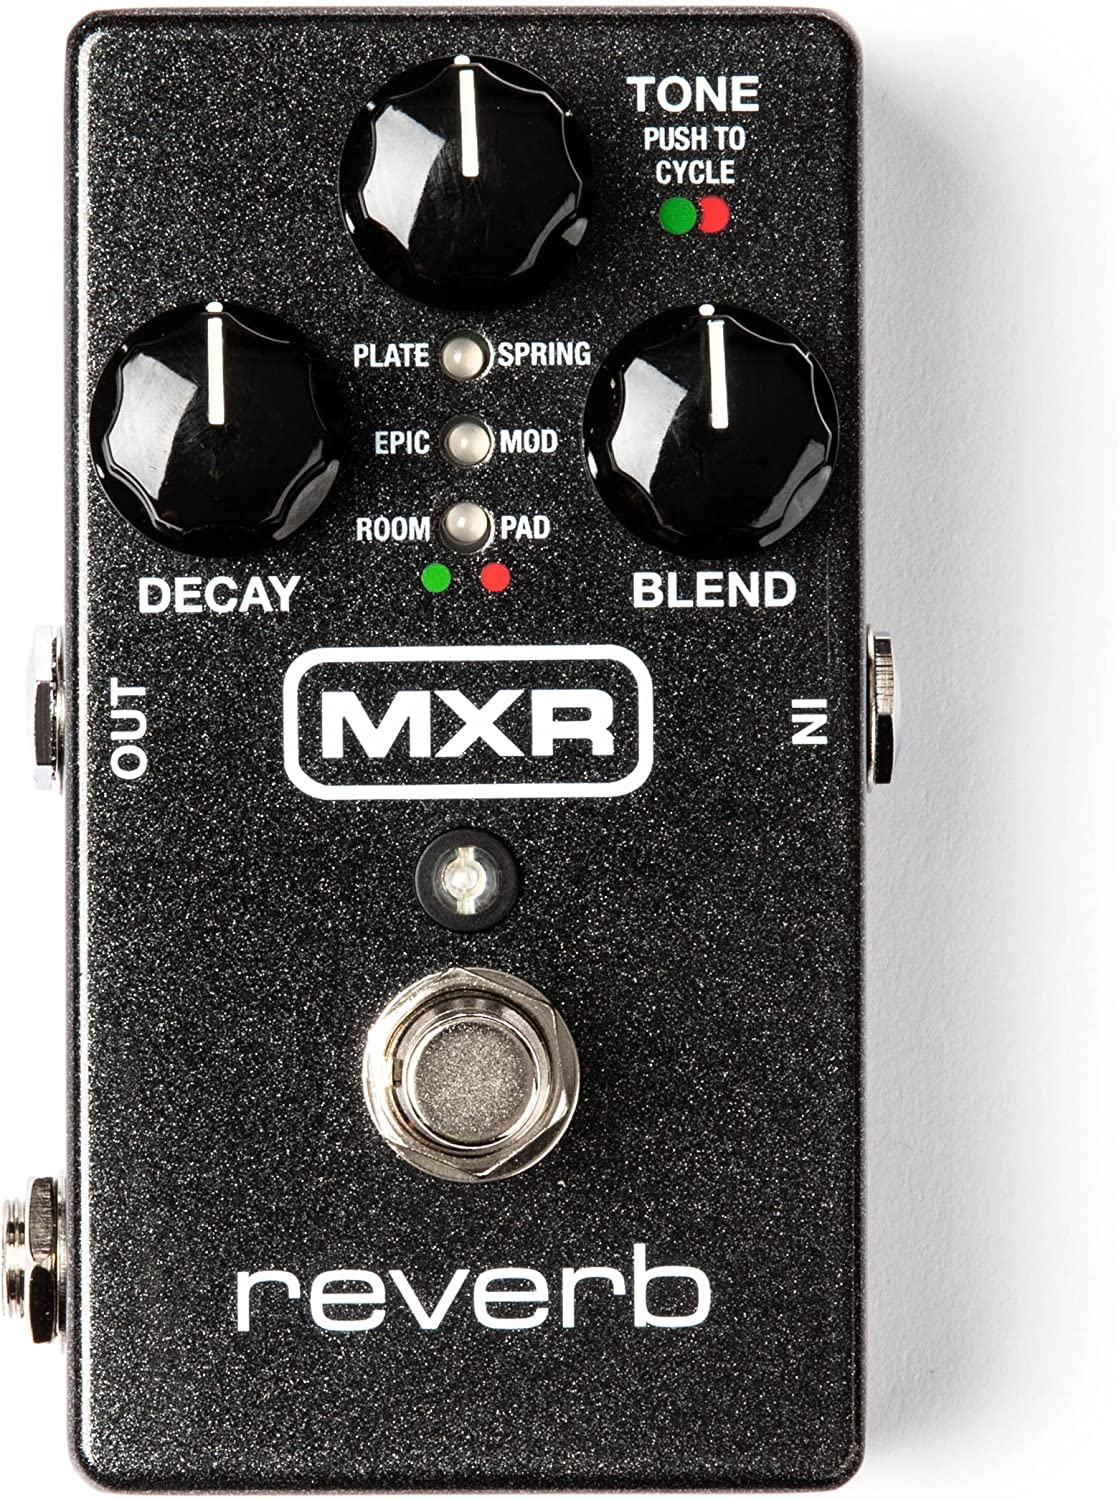 MXR Reverb Guitar Effects Pedal on a white background